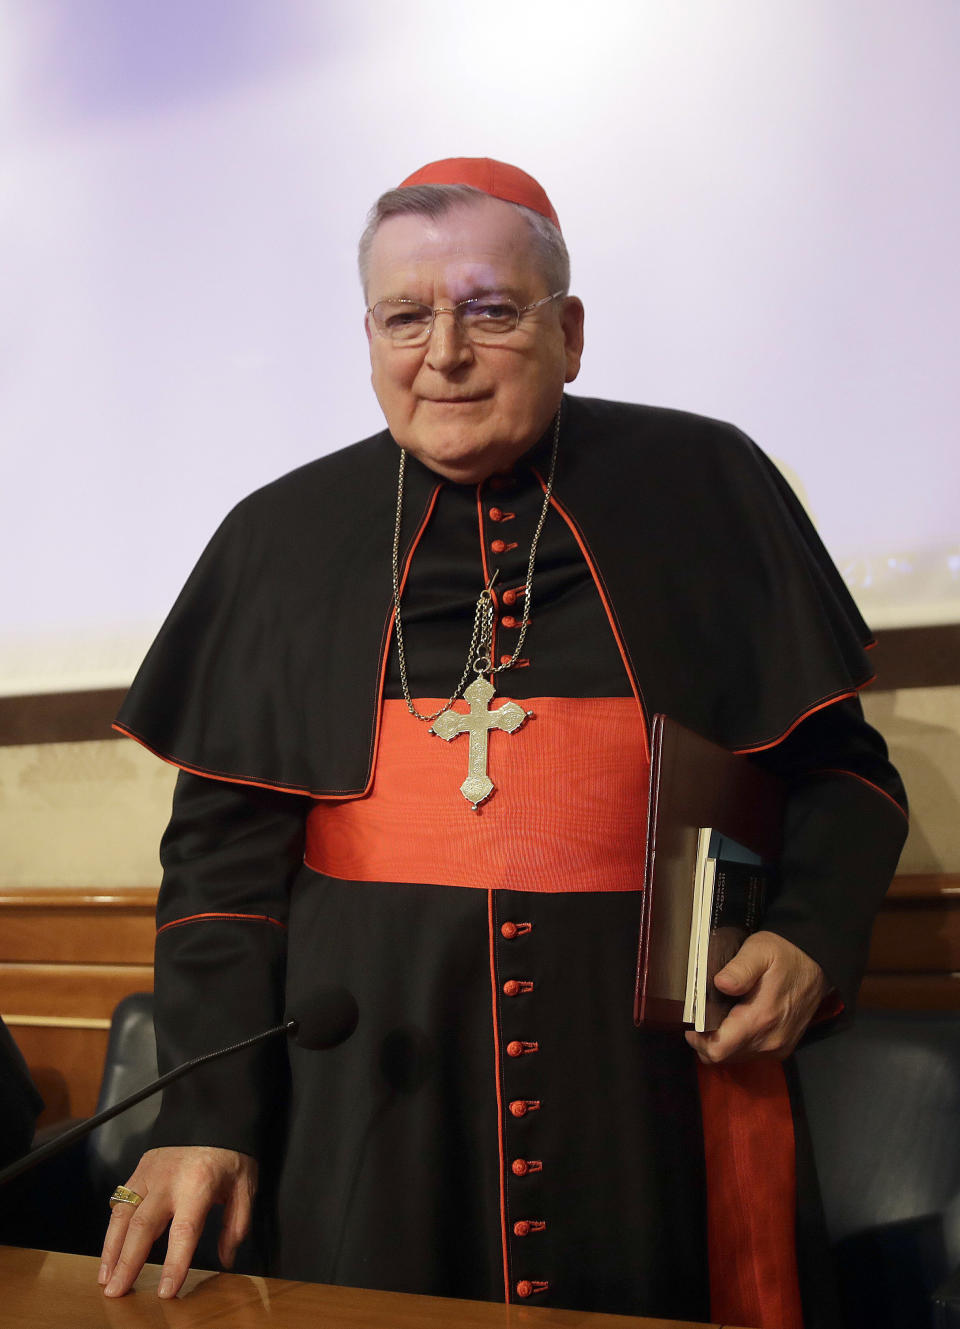 Cardinal Raymond Burke has often clashed publicly with Pope Francis. (Photo: ASSOCIATED PRESS)